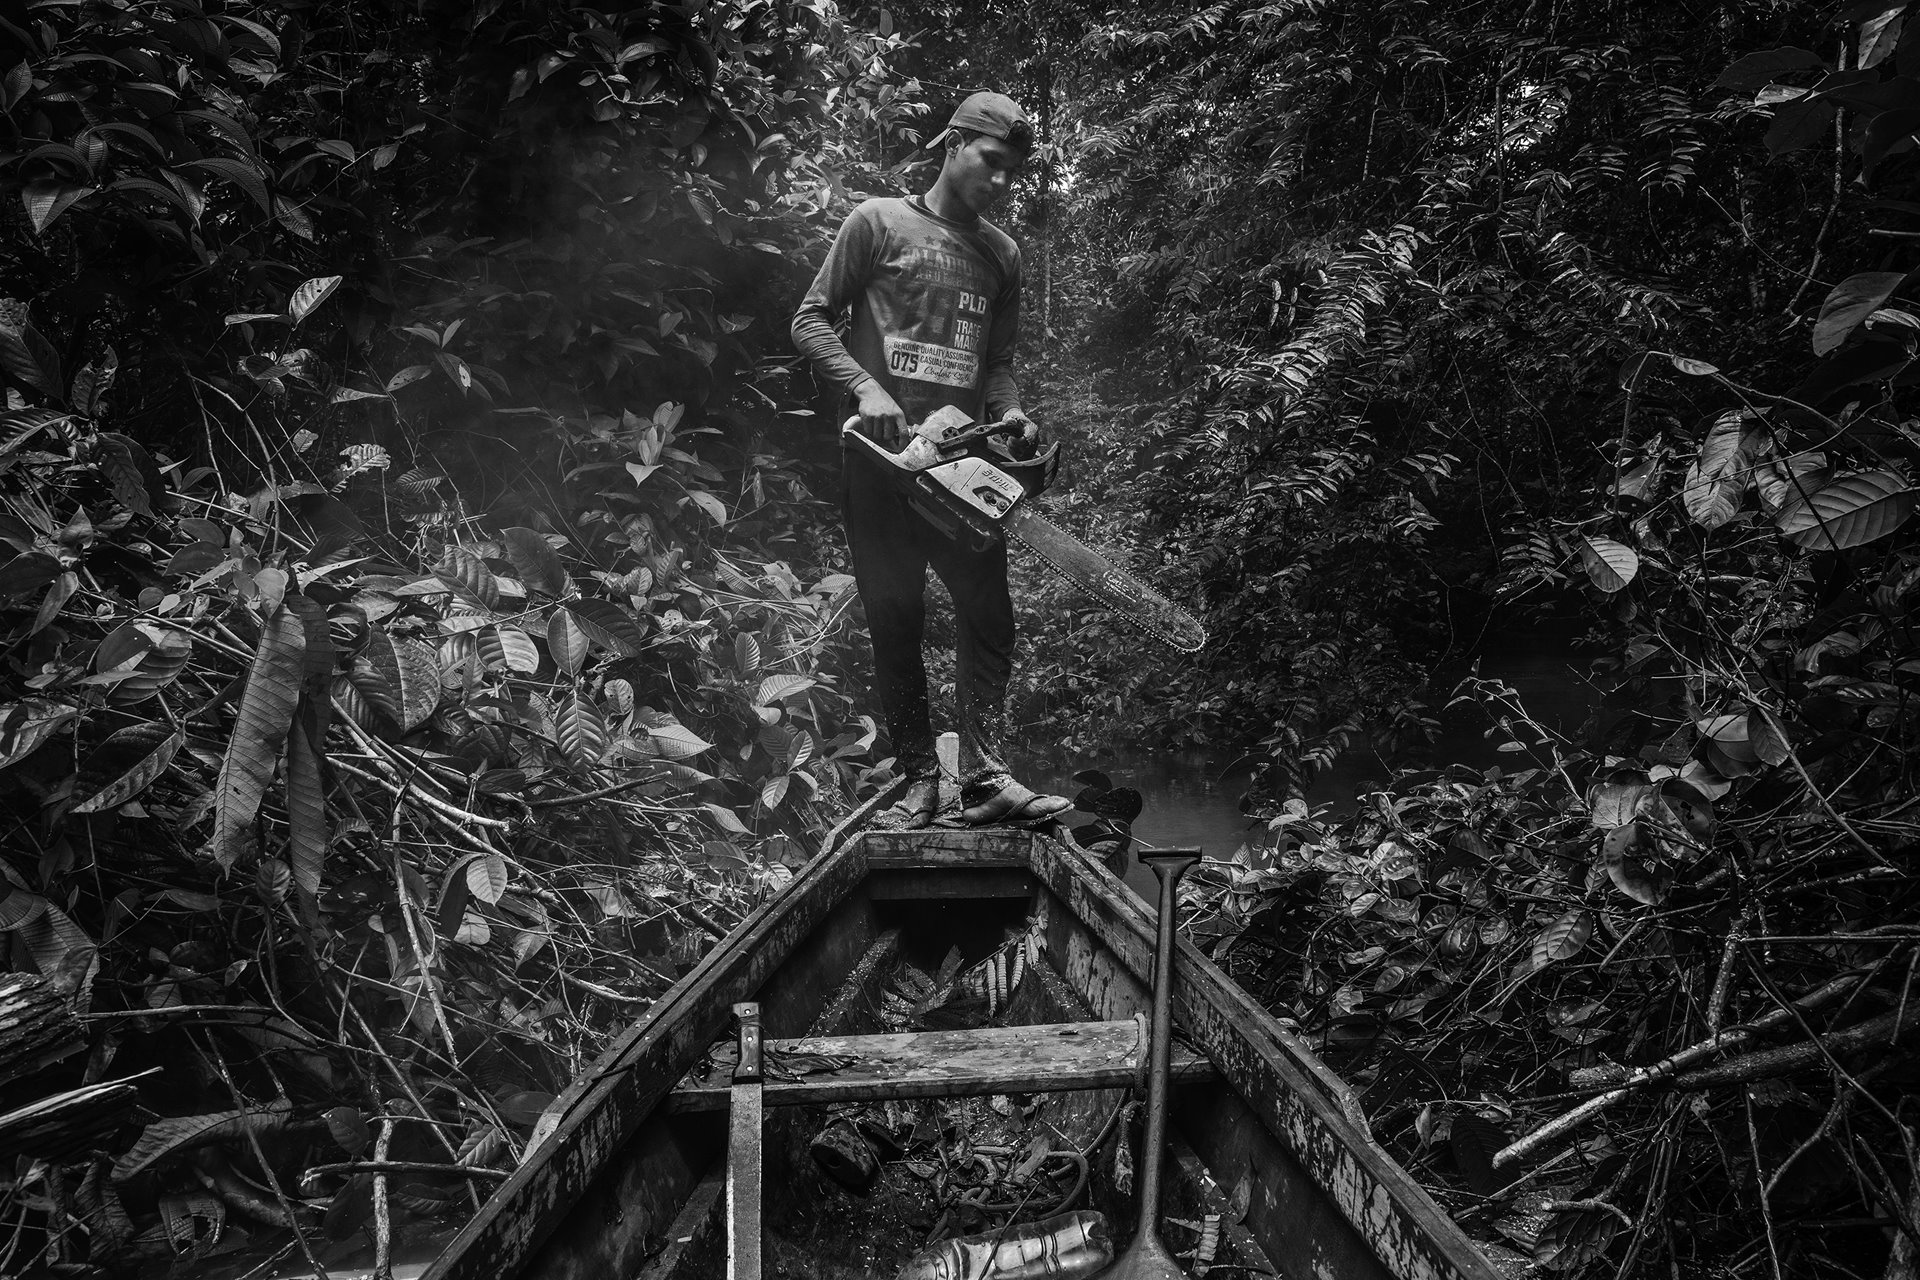 Brazilian photographer Lalo de Almeida won the Long-Term Projects category for his series Amazonian Dystopia, documenting the plight of the Amazon rainforest, and the people who live their.